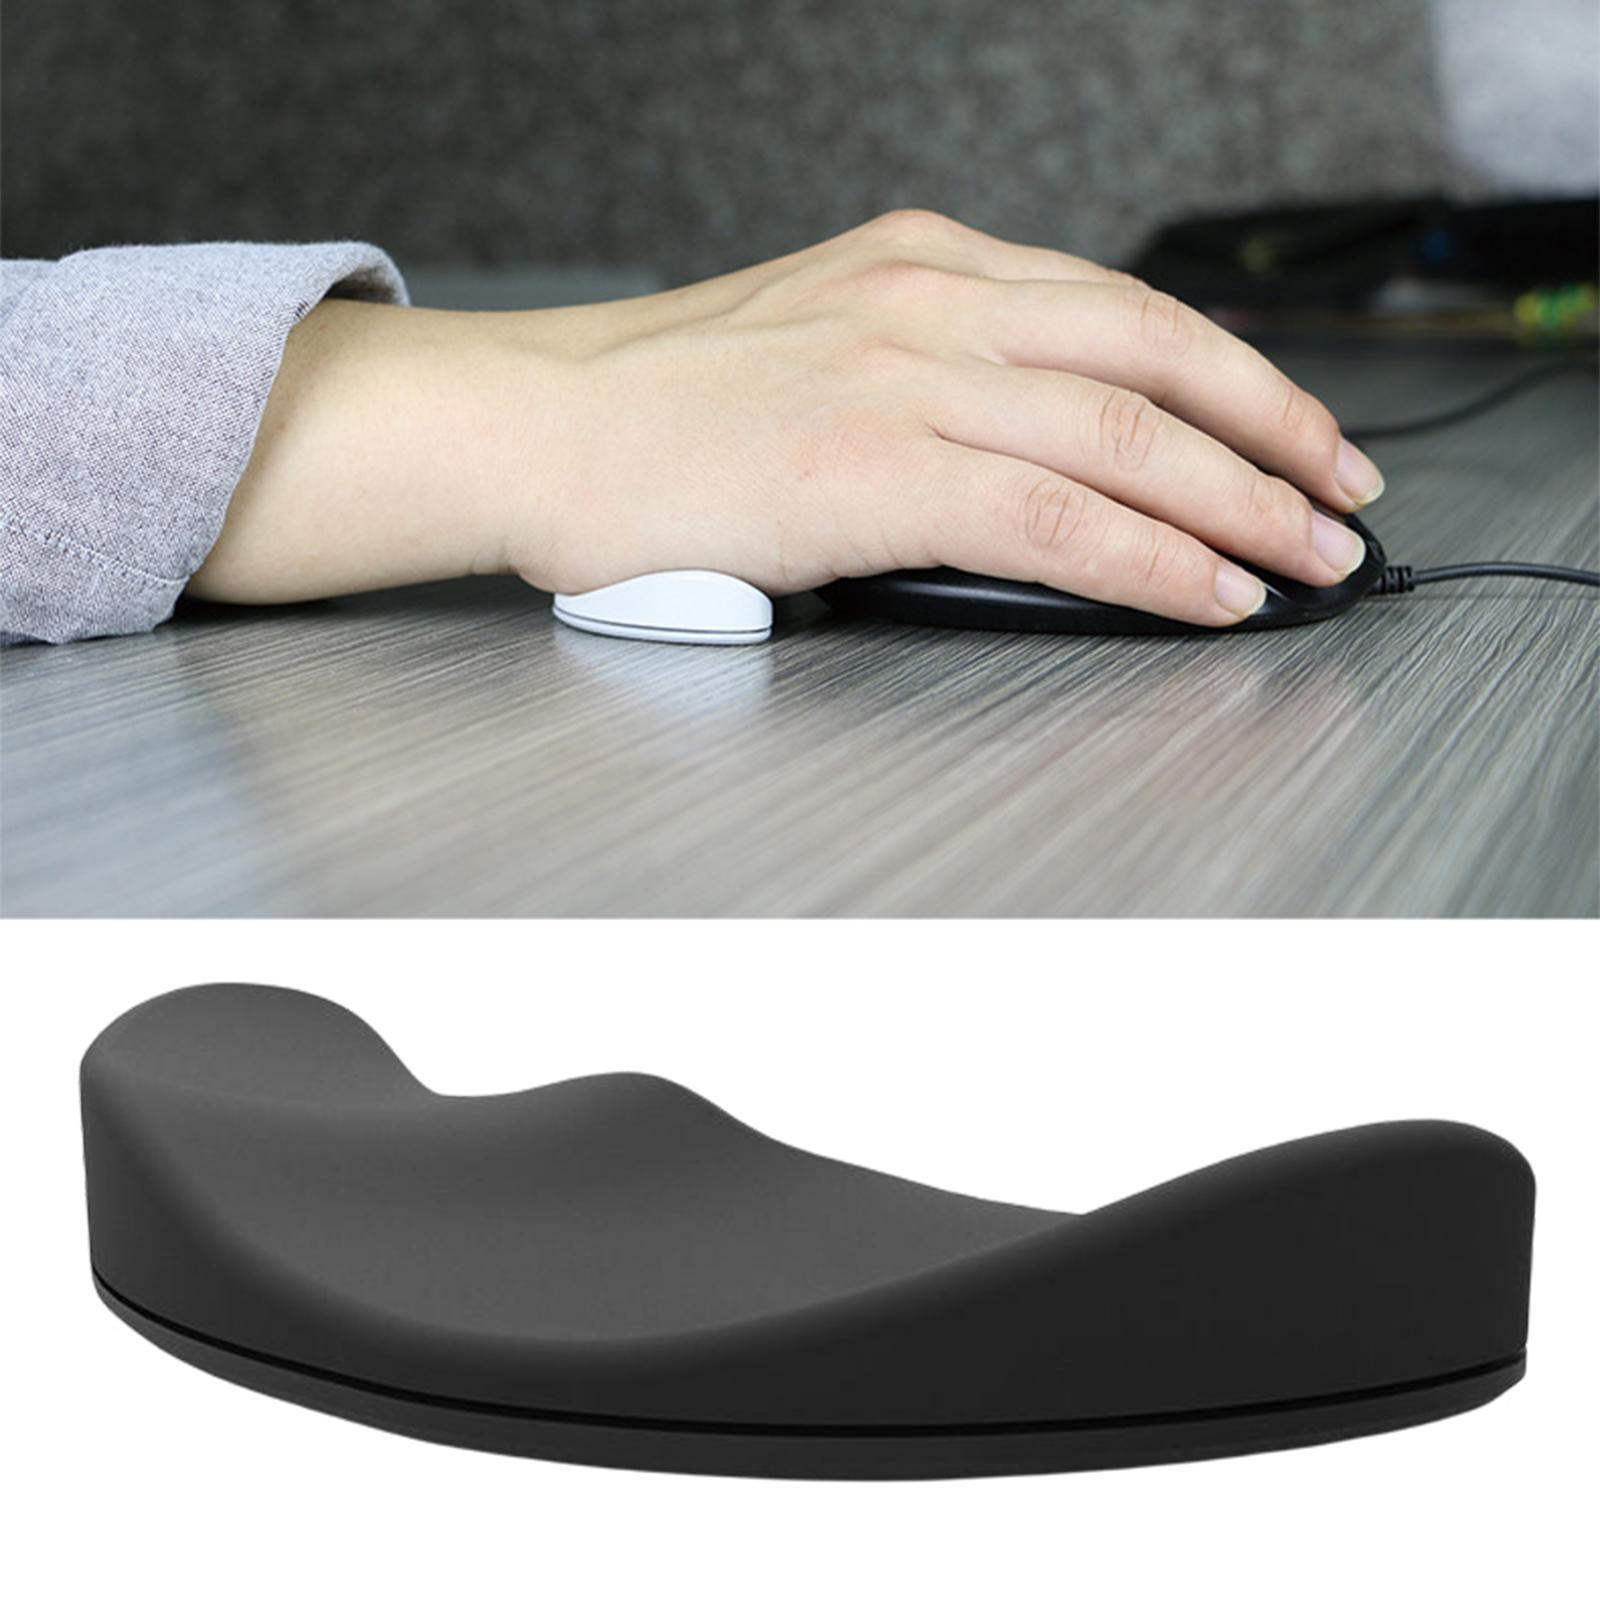 Mouse Wrist Ergonomic Support Silicon Mousepad for Laptop Gaming